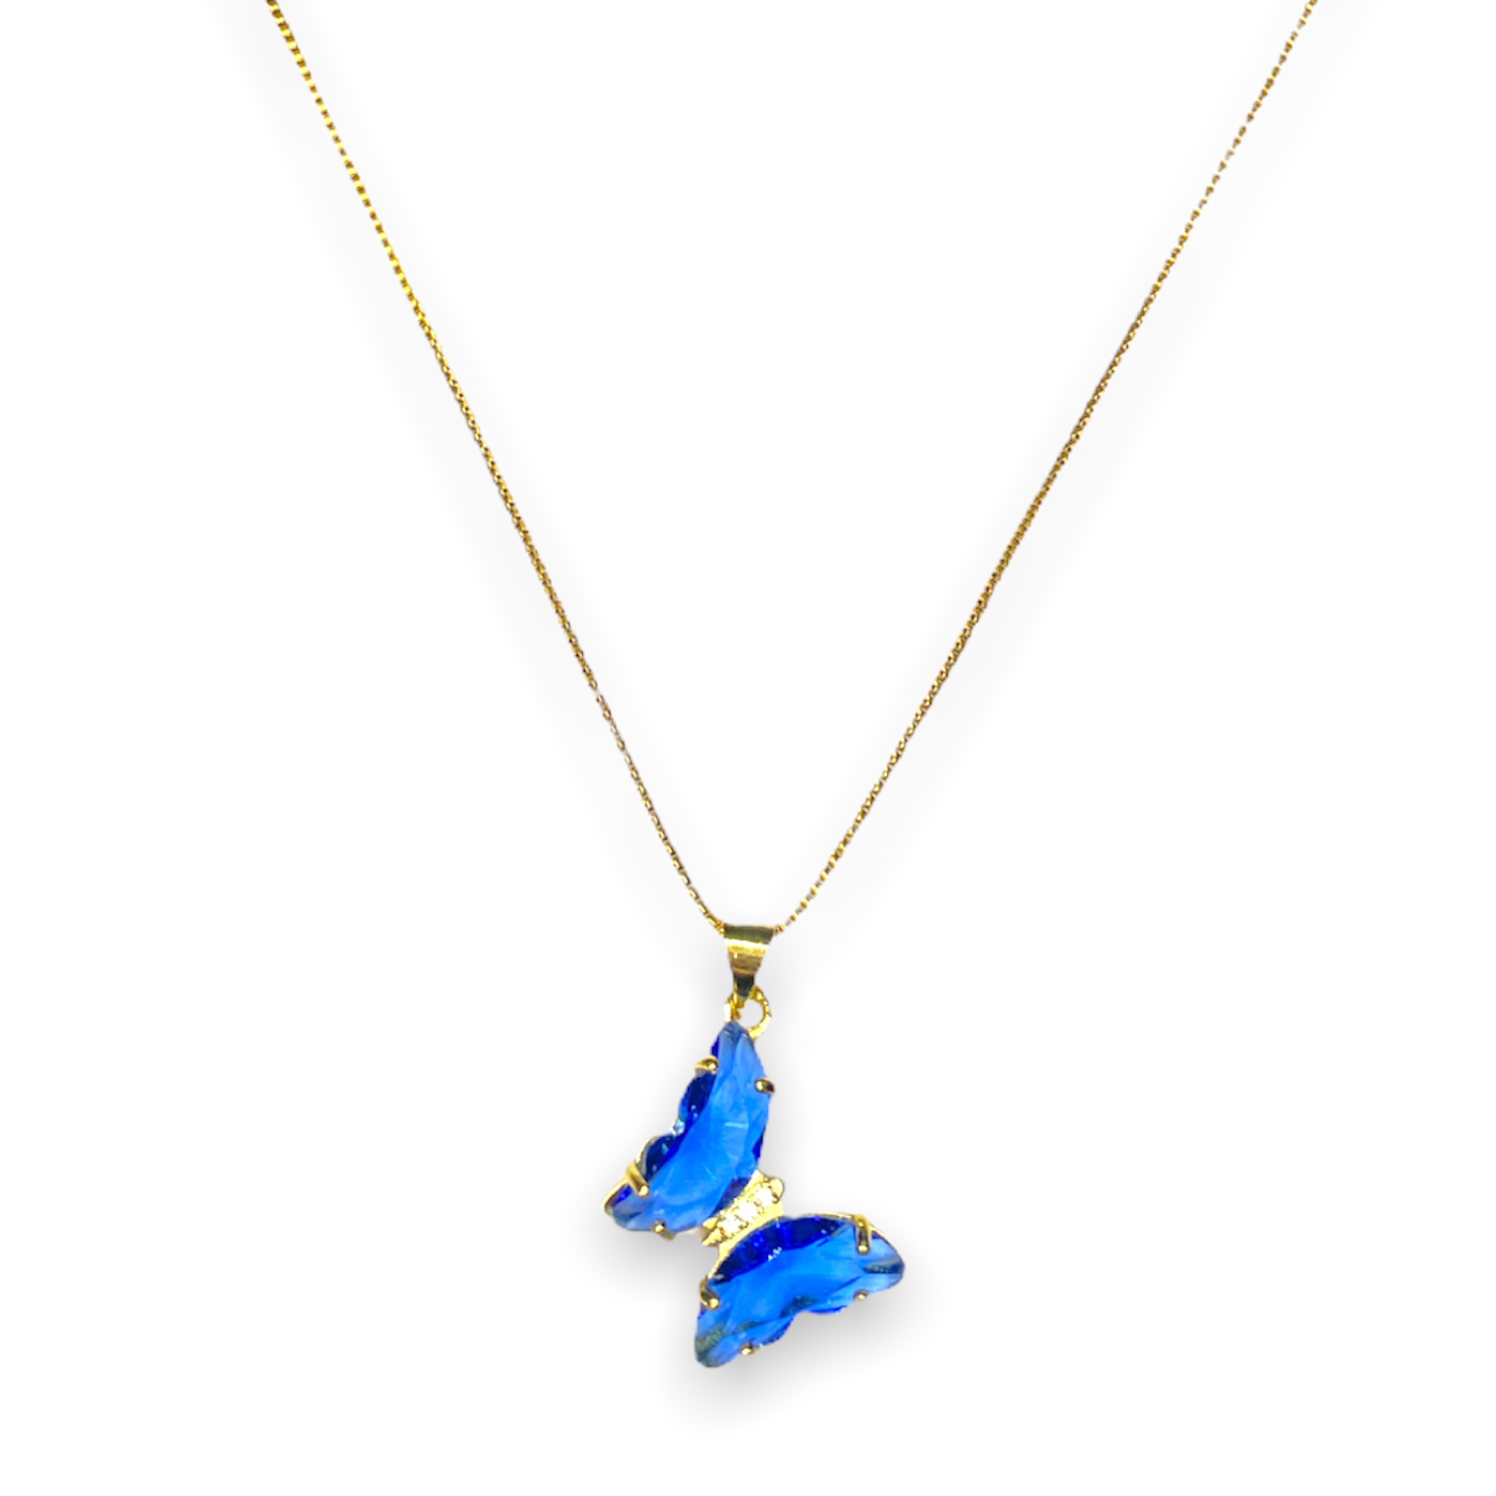 Blue Dangling Butterfly Necklace